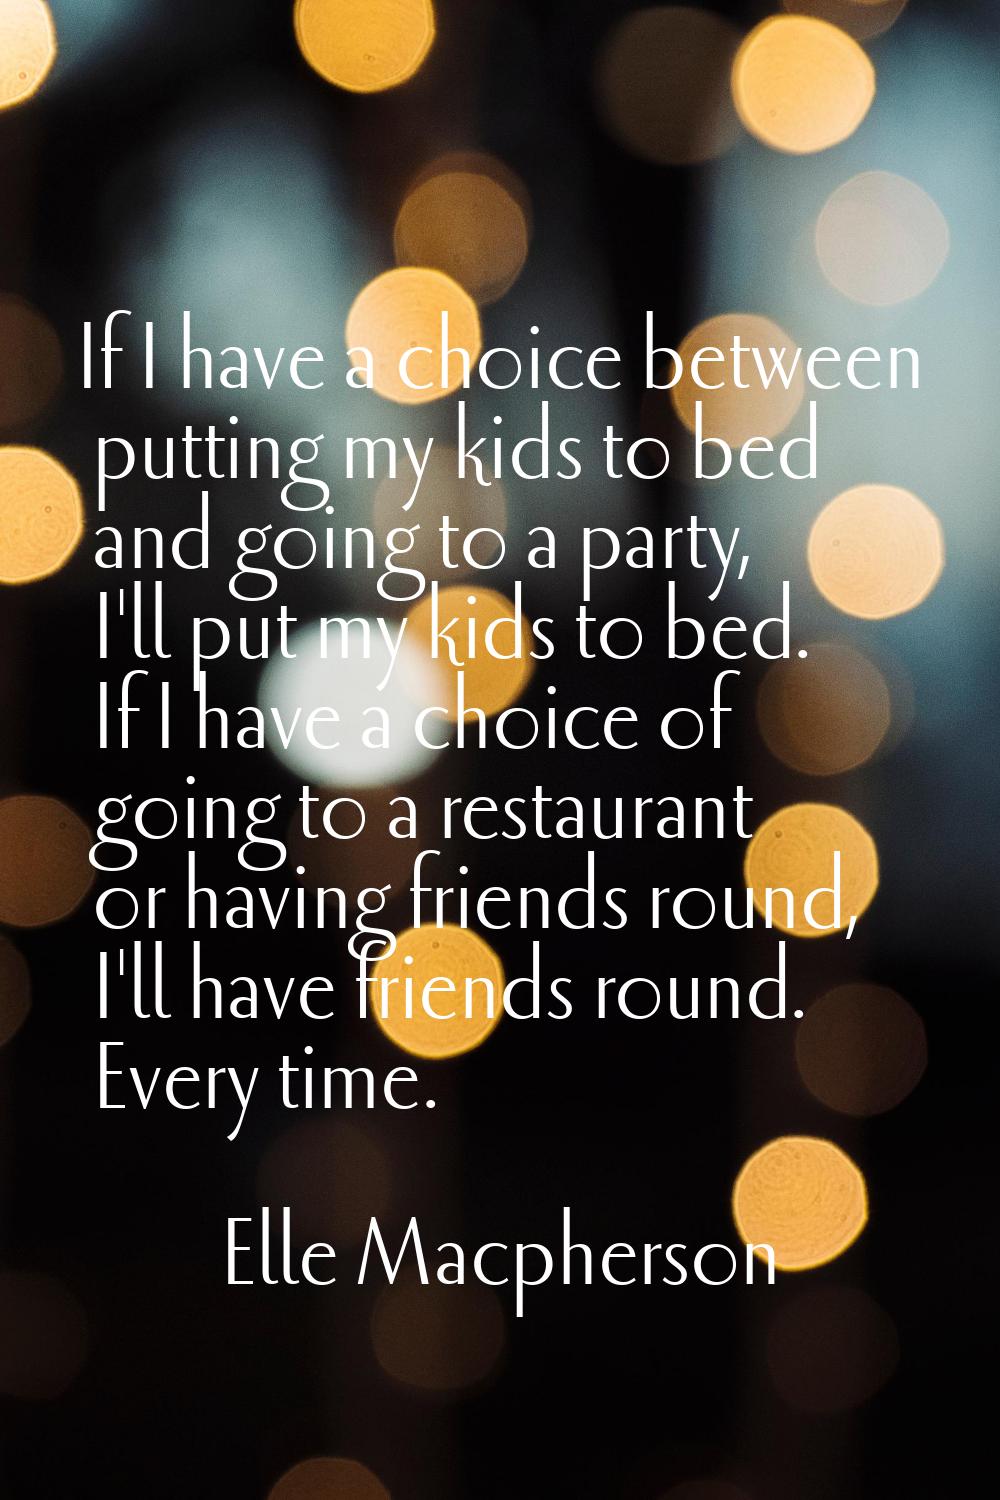 If I have a choice between putting my kids to bed and going to a party, I'll put my kids to bed. If